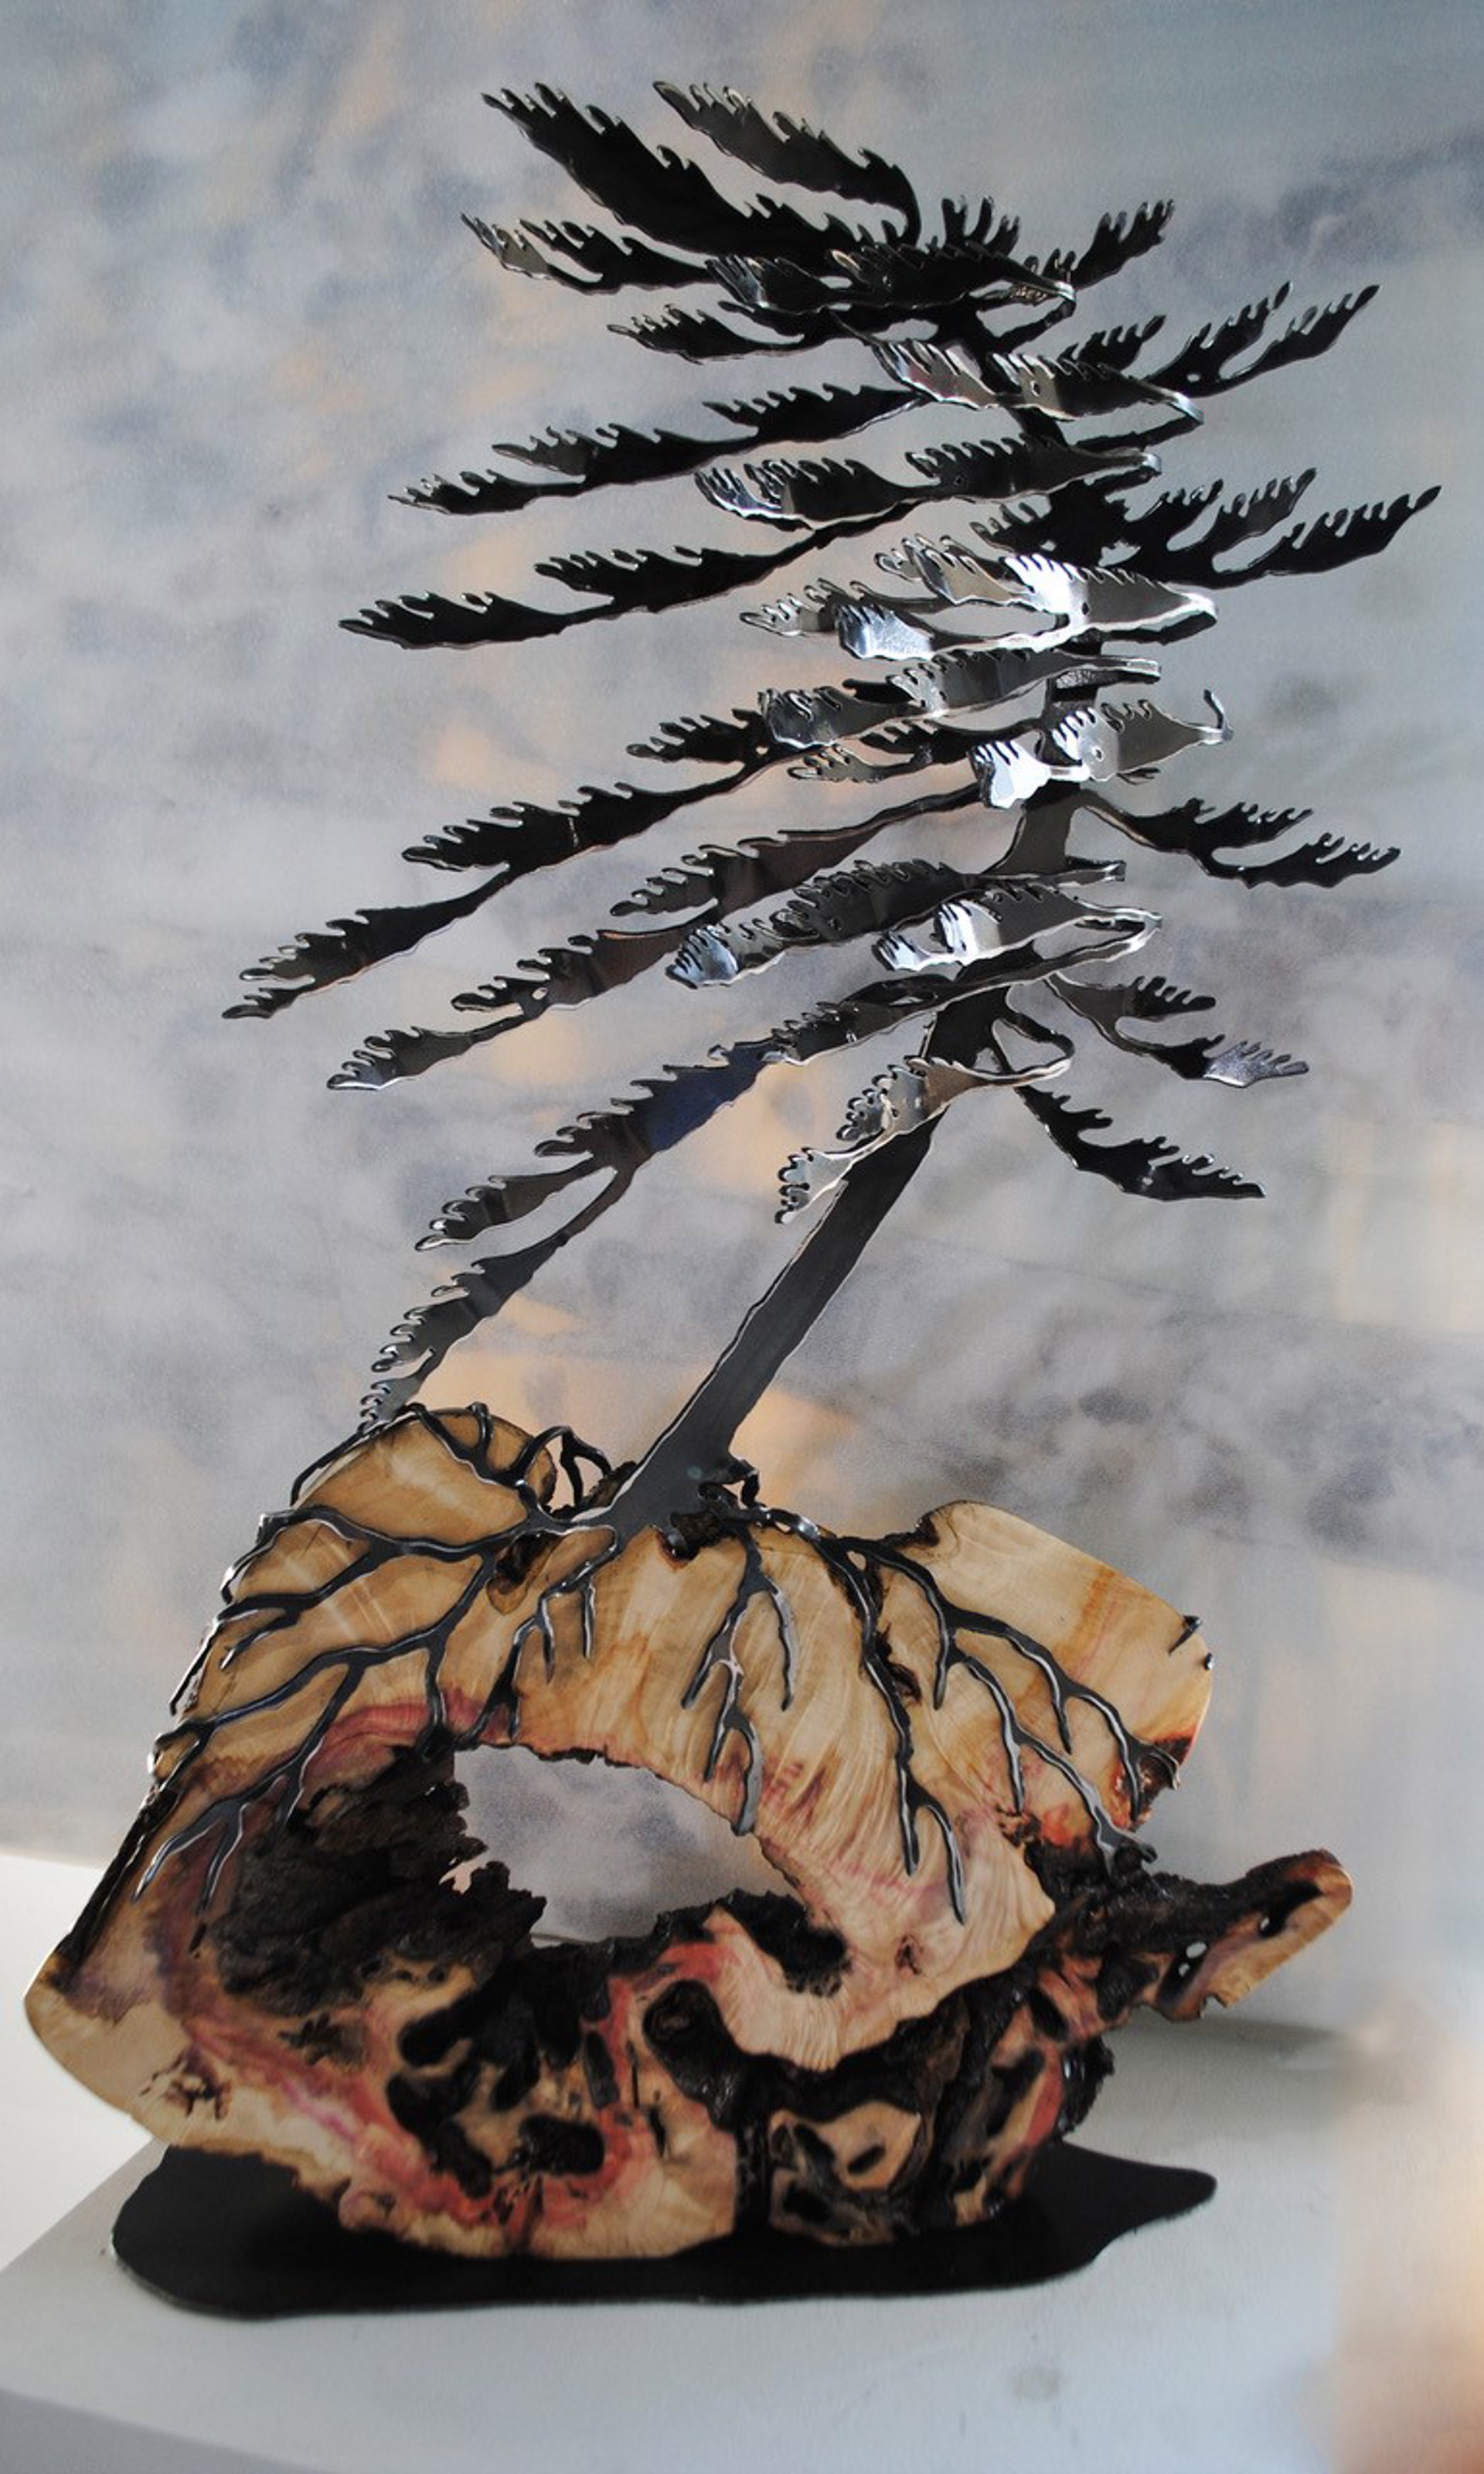 Windswept Pine on Maple Burl 6406 by Cathy Mark